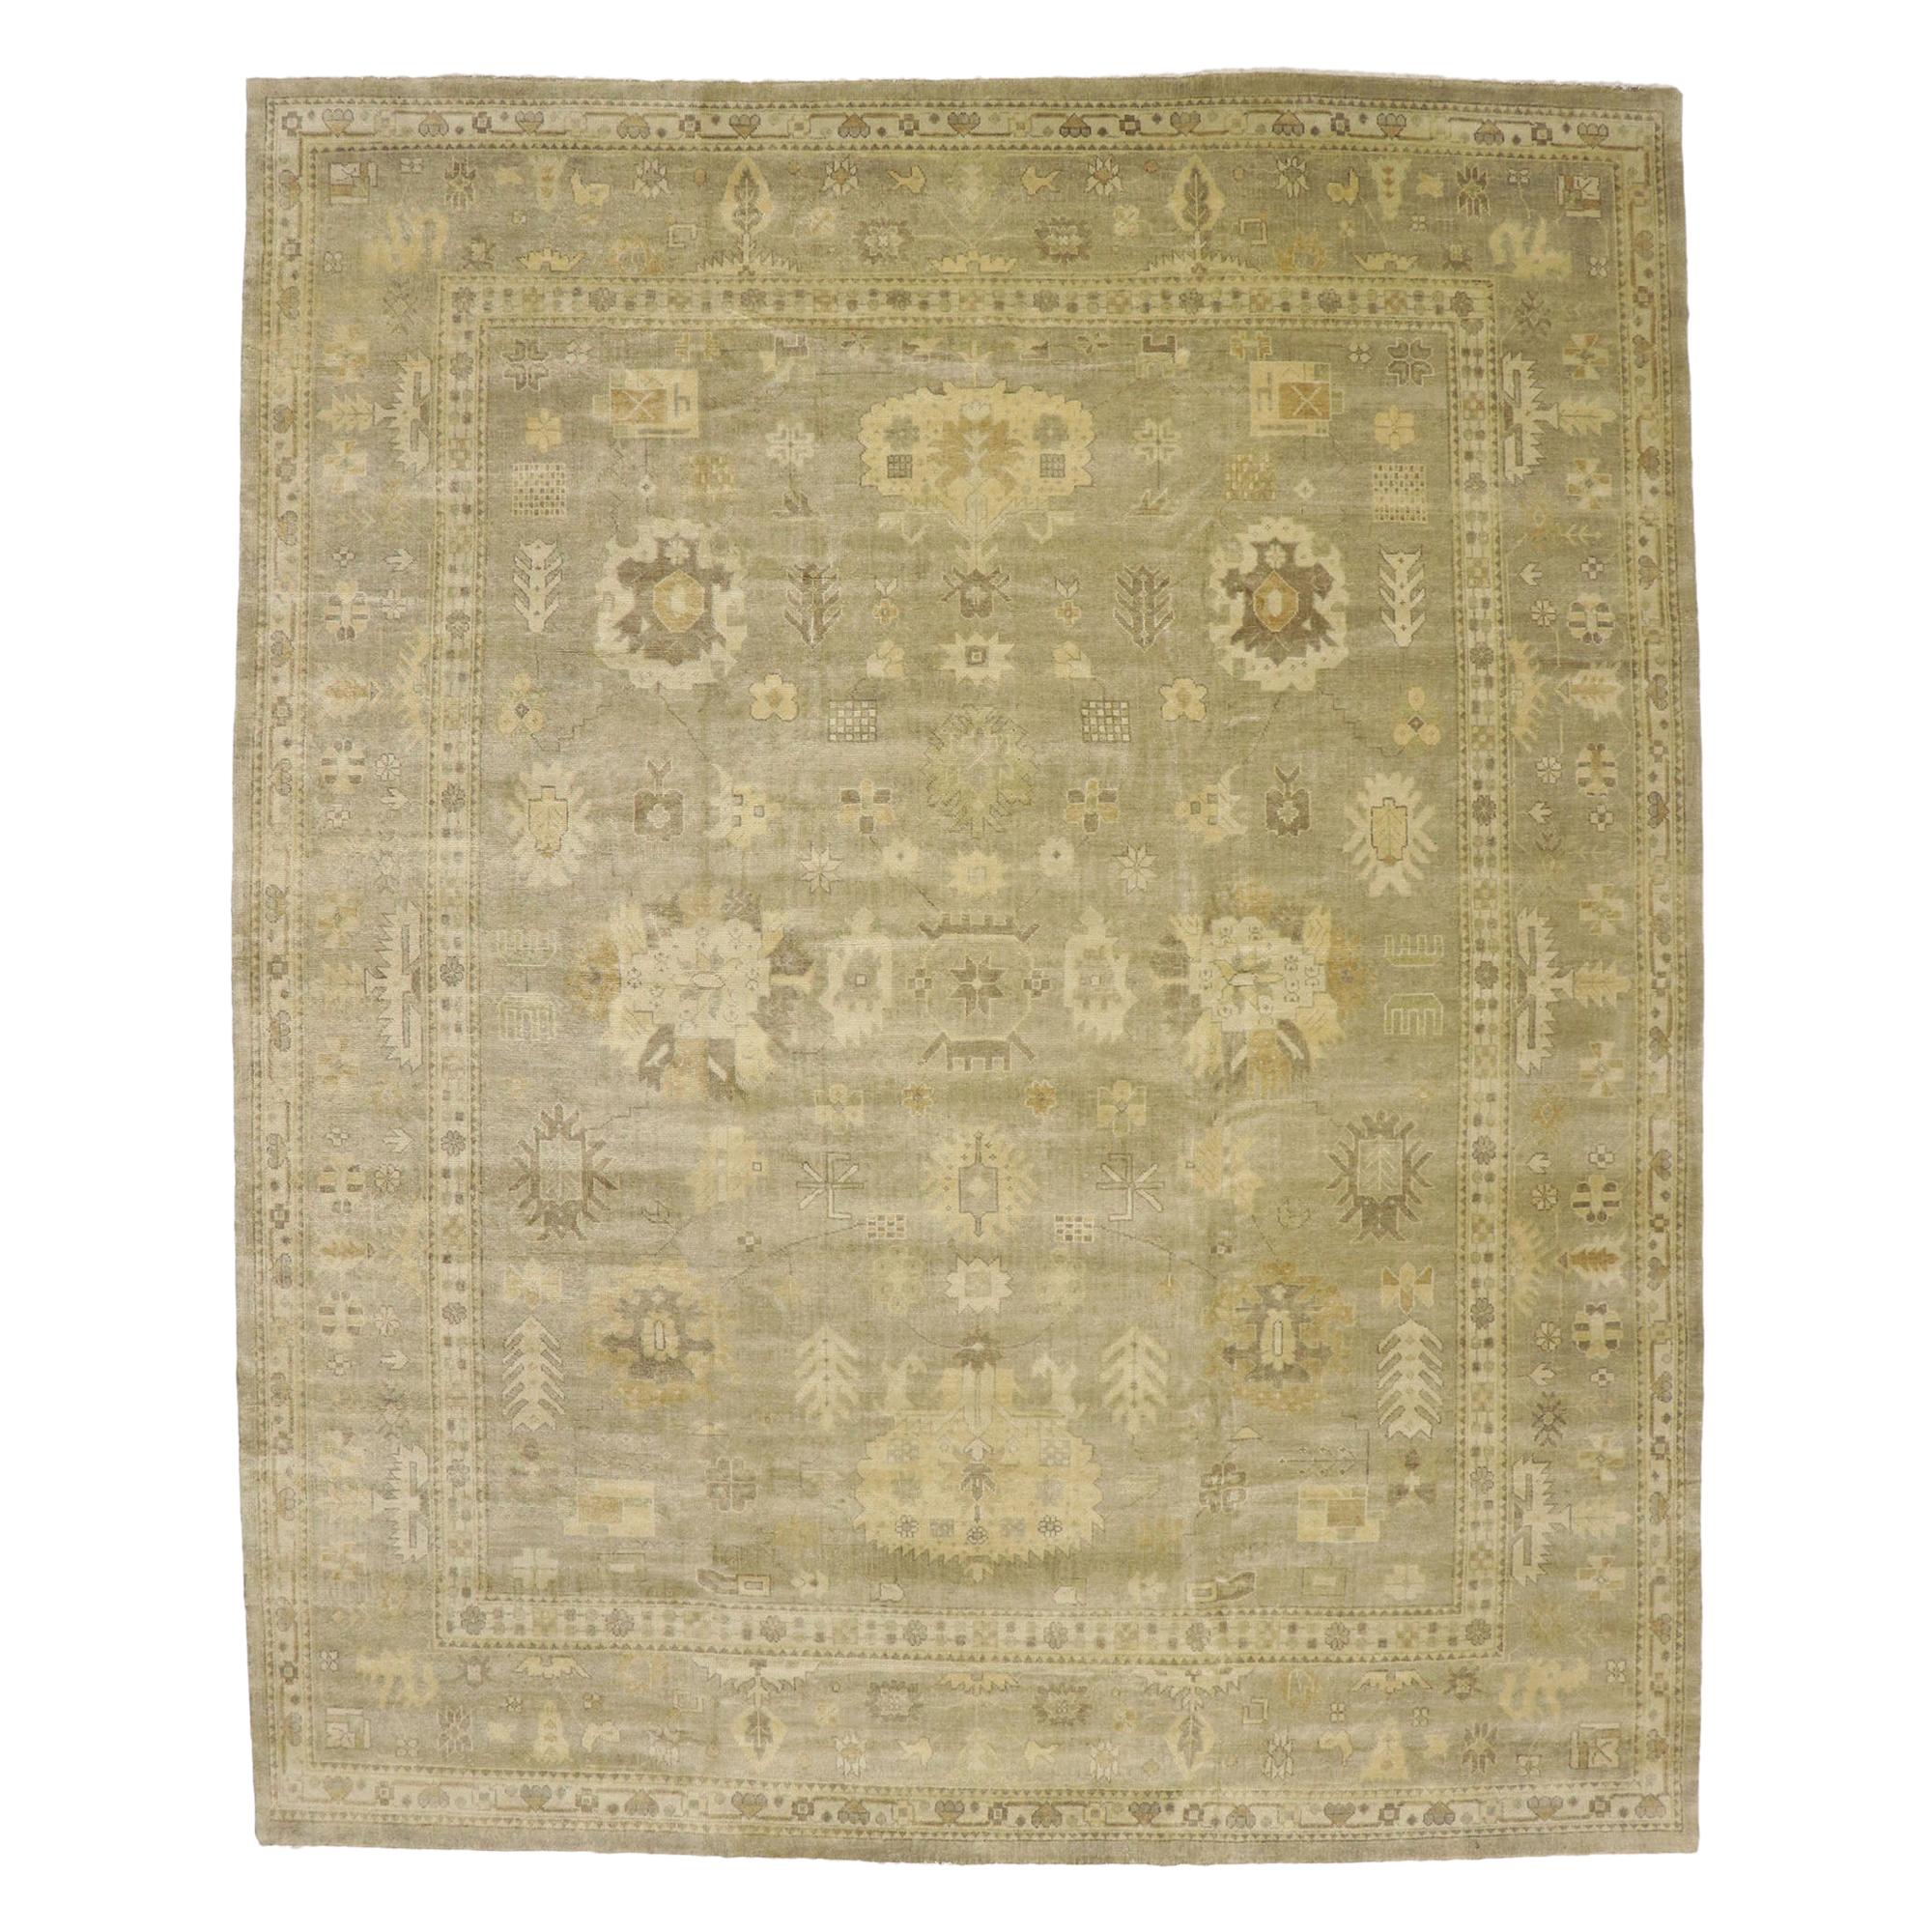 New Contemporary Oushak Rug with Transitional Style and Warm, Neutral Colors